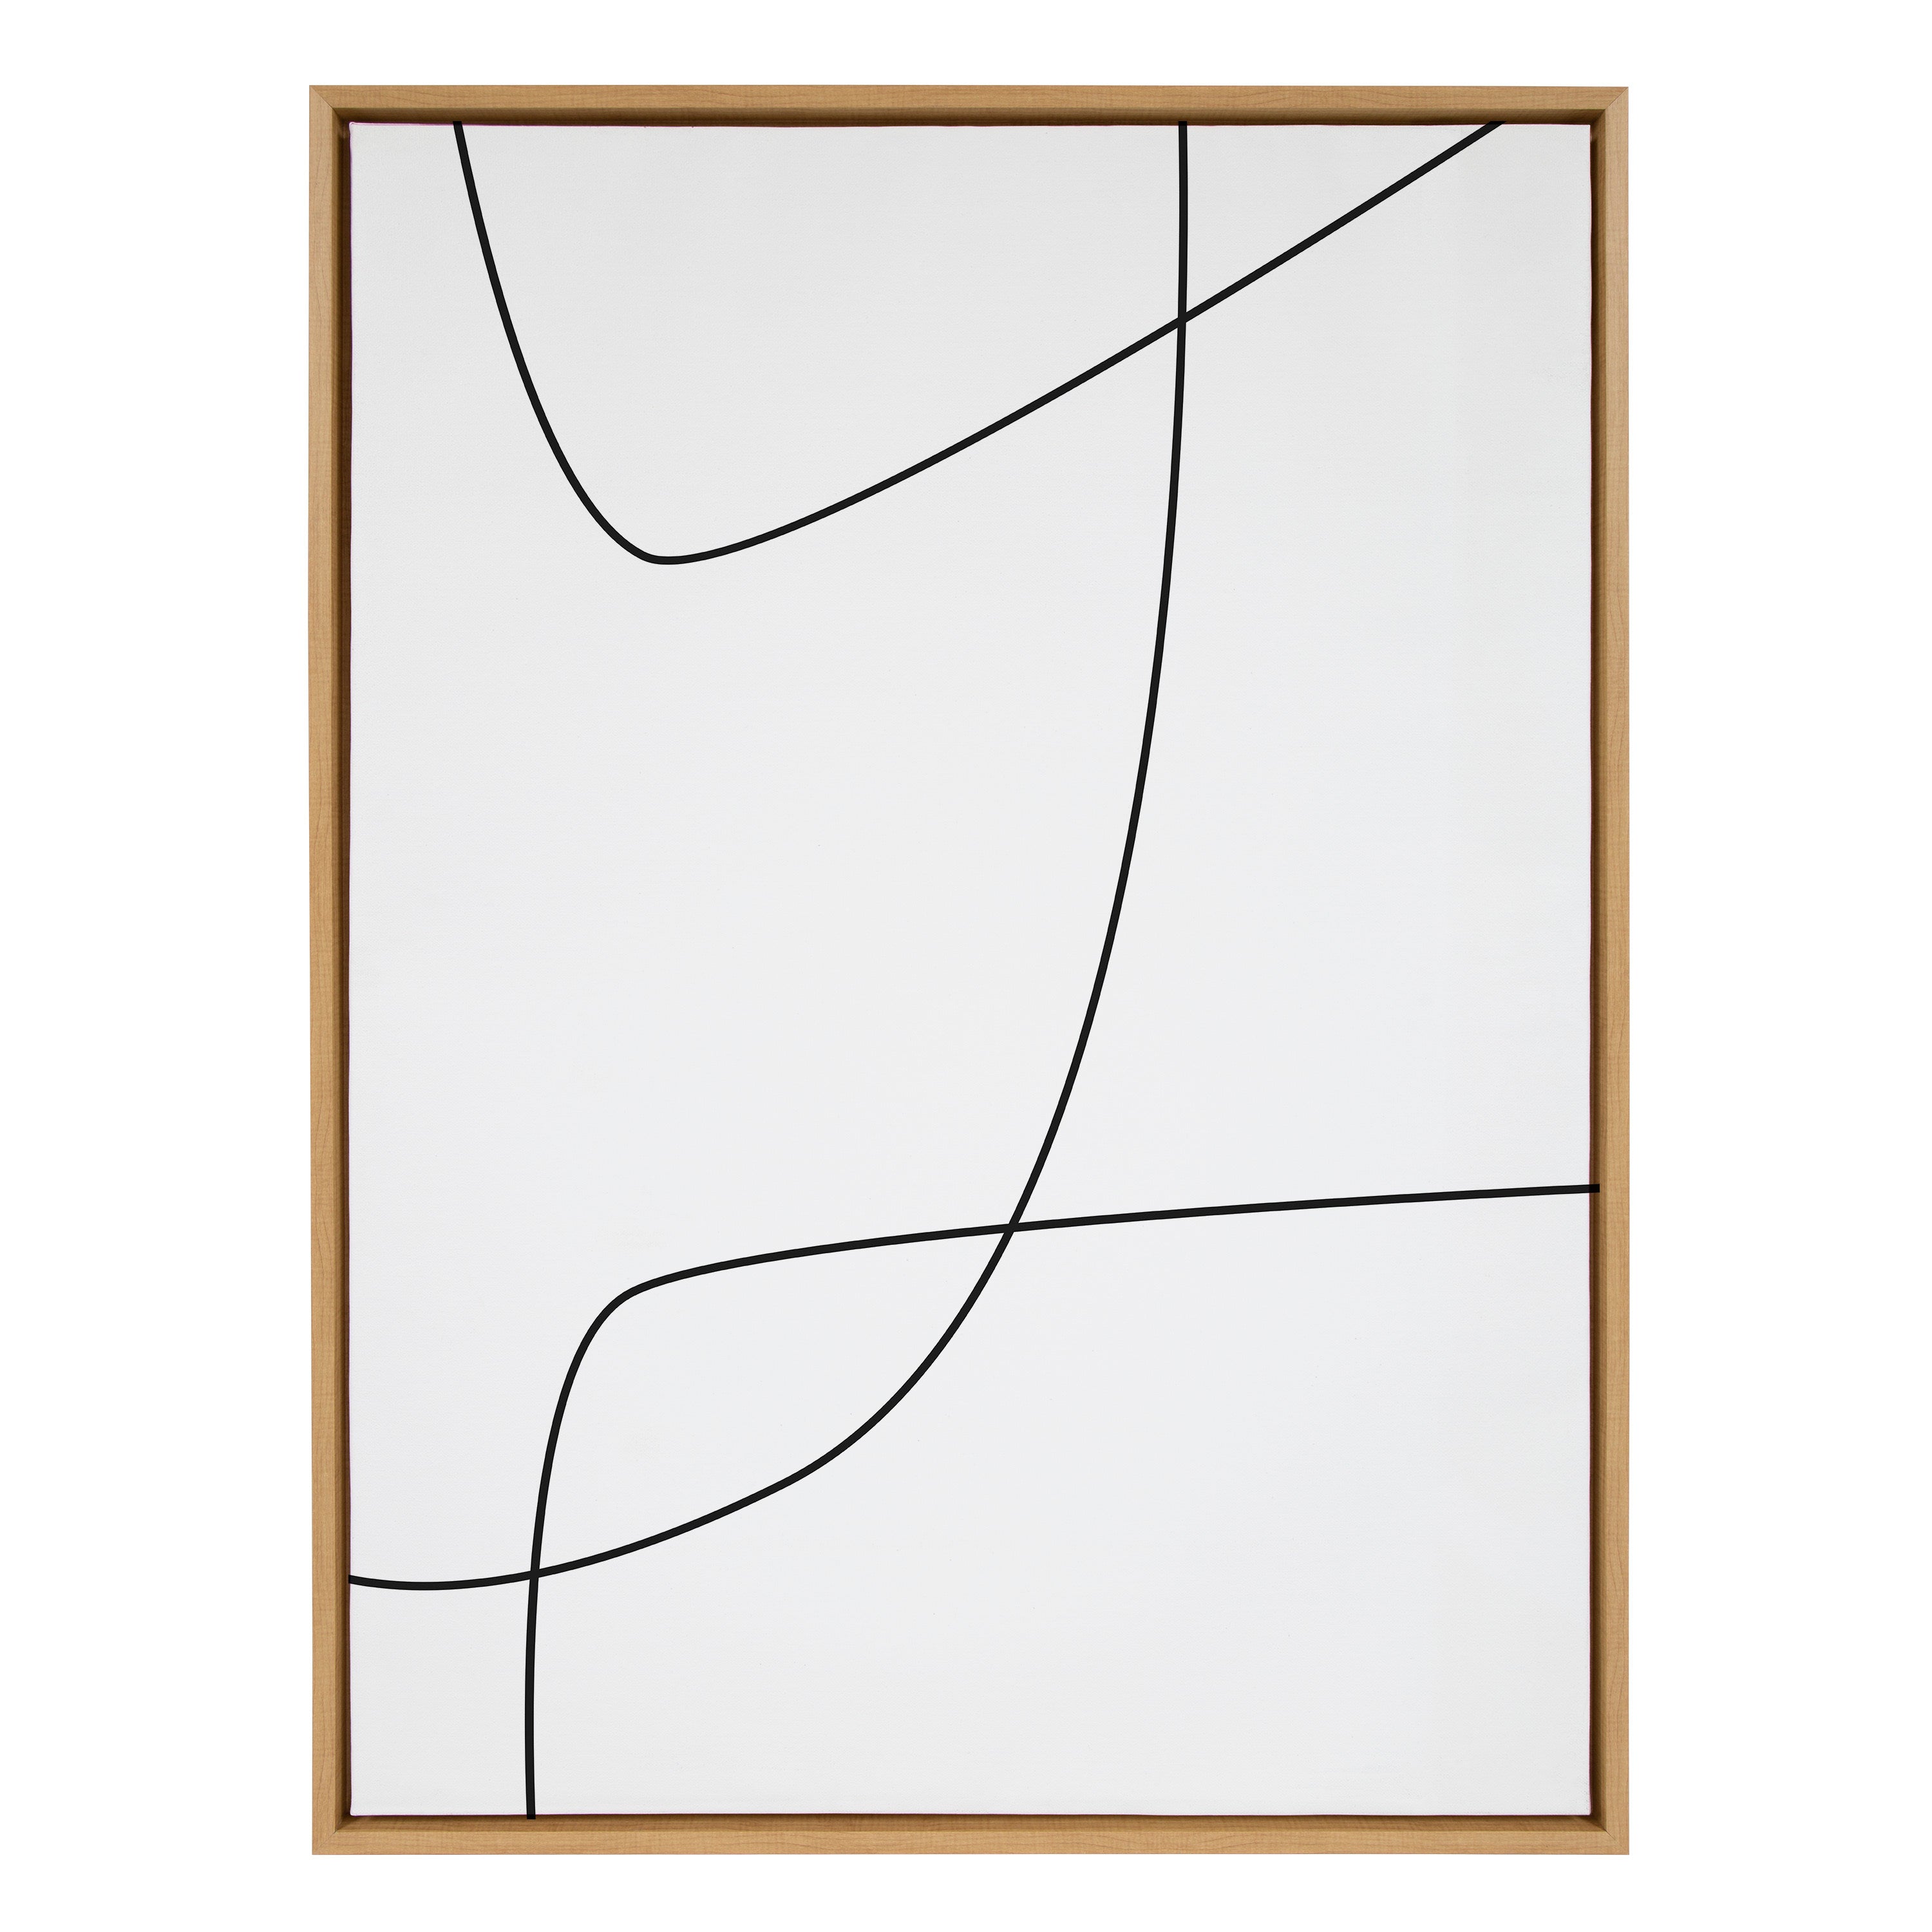 Sylvie Modern Line Abstract 3 BW Framed Canvas by The Creative Bunch Studio